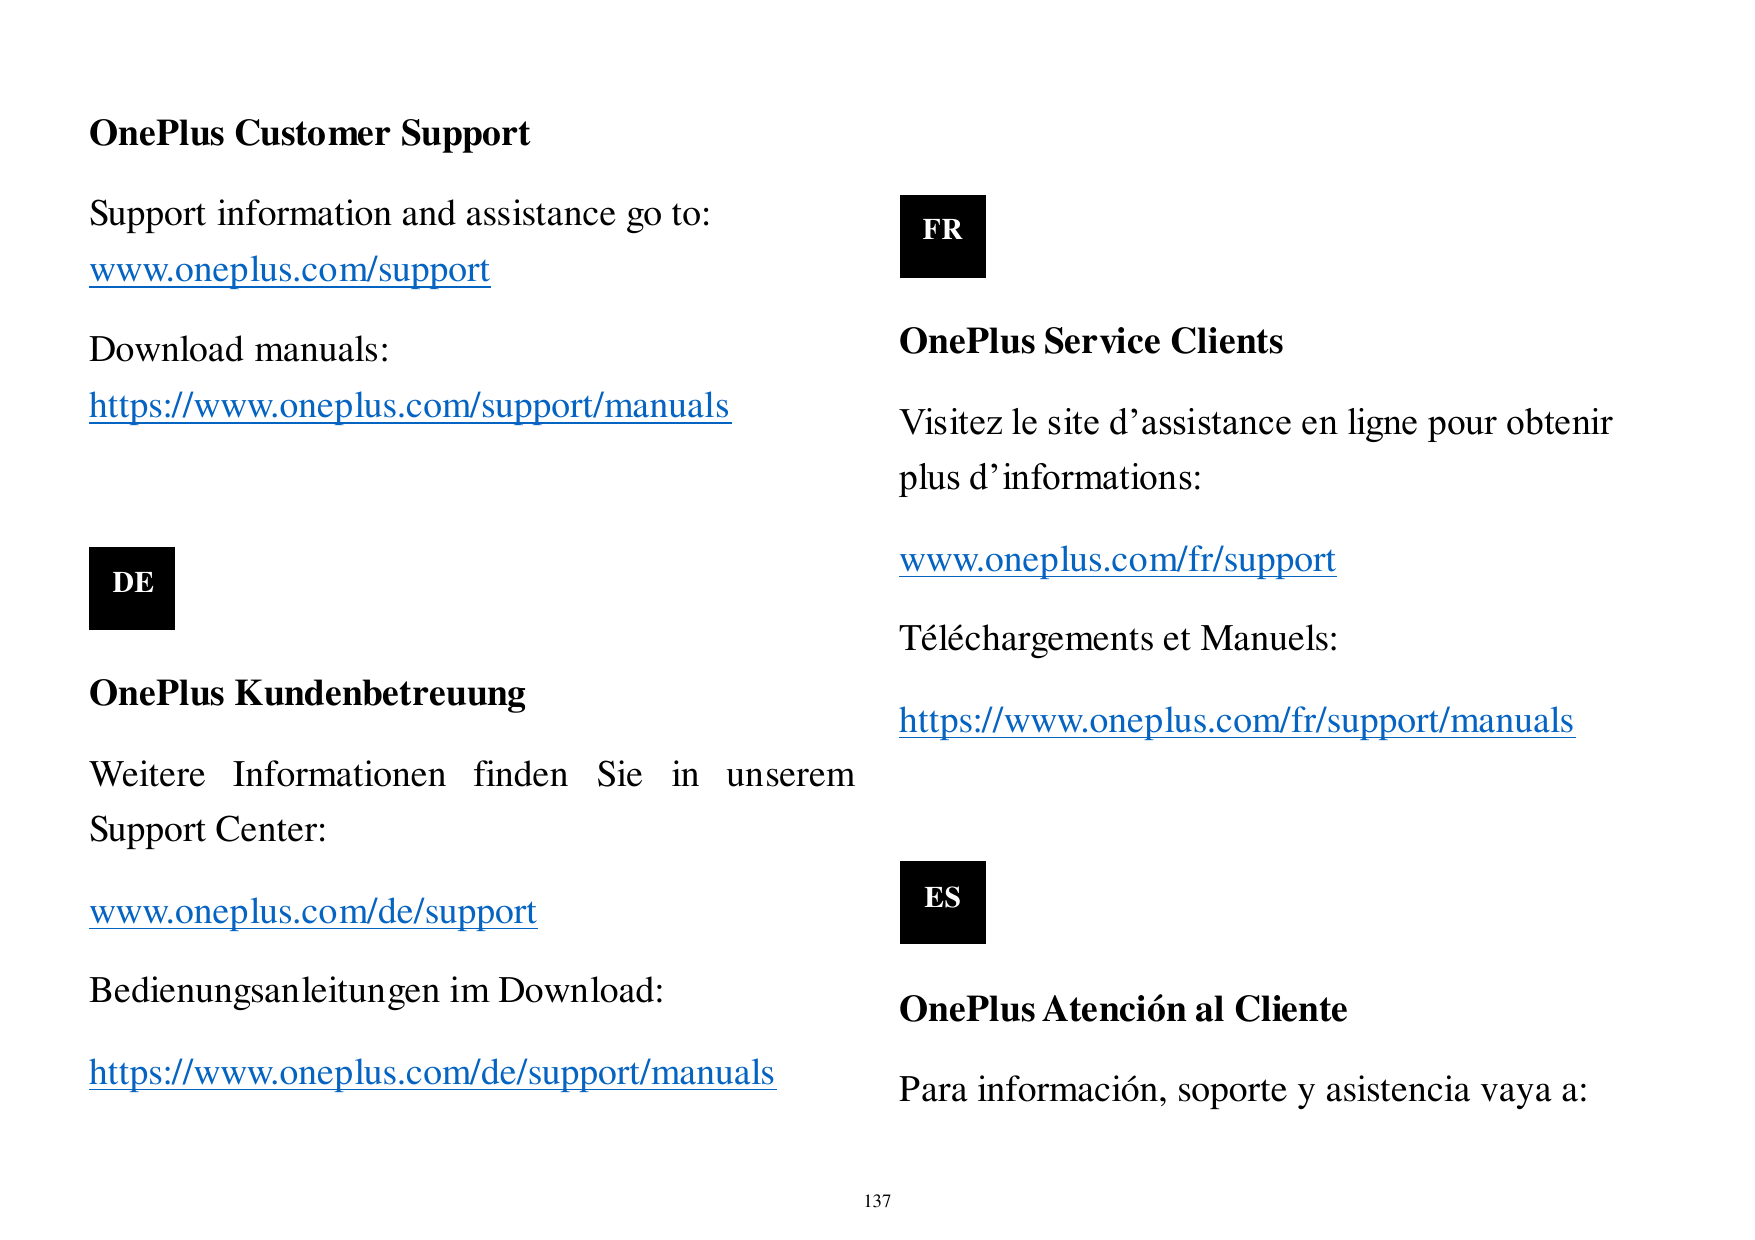 OnePlus Customer SupportSupport information and assistance go to:FRwww.oneplus.com/supportOnePlus Service ClientsDownload manual